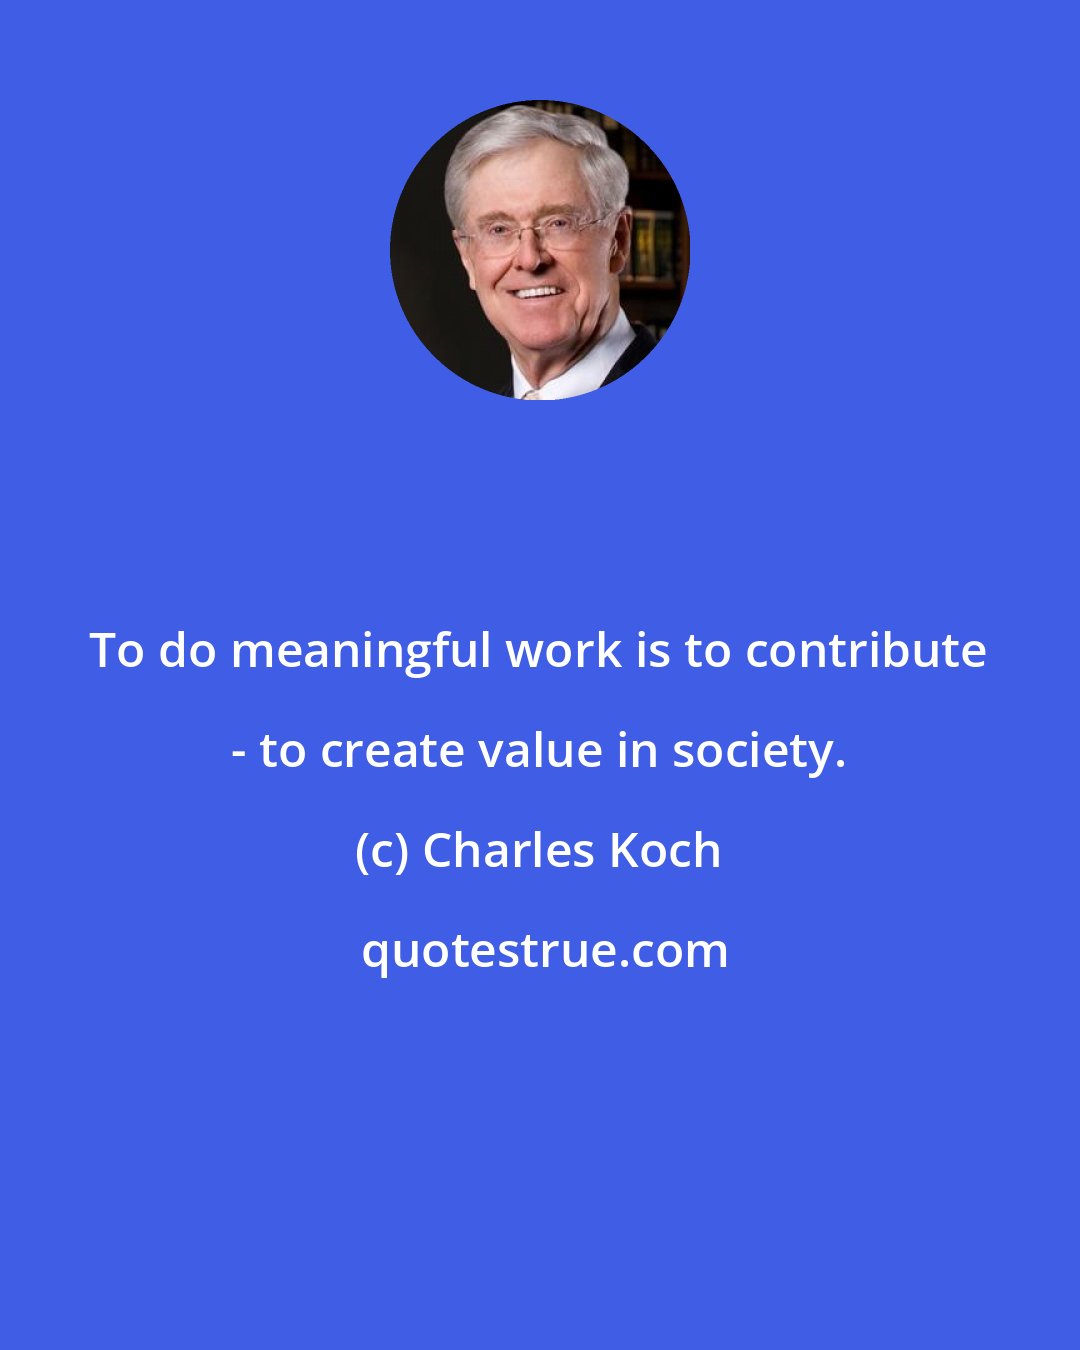 Charles Koch: To do meaningful work is to contribute - to create value in society.